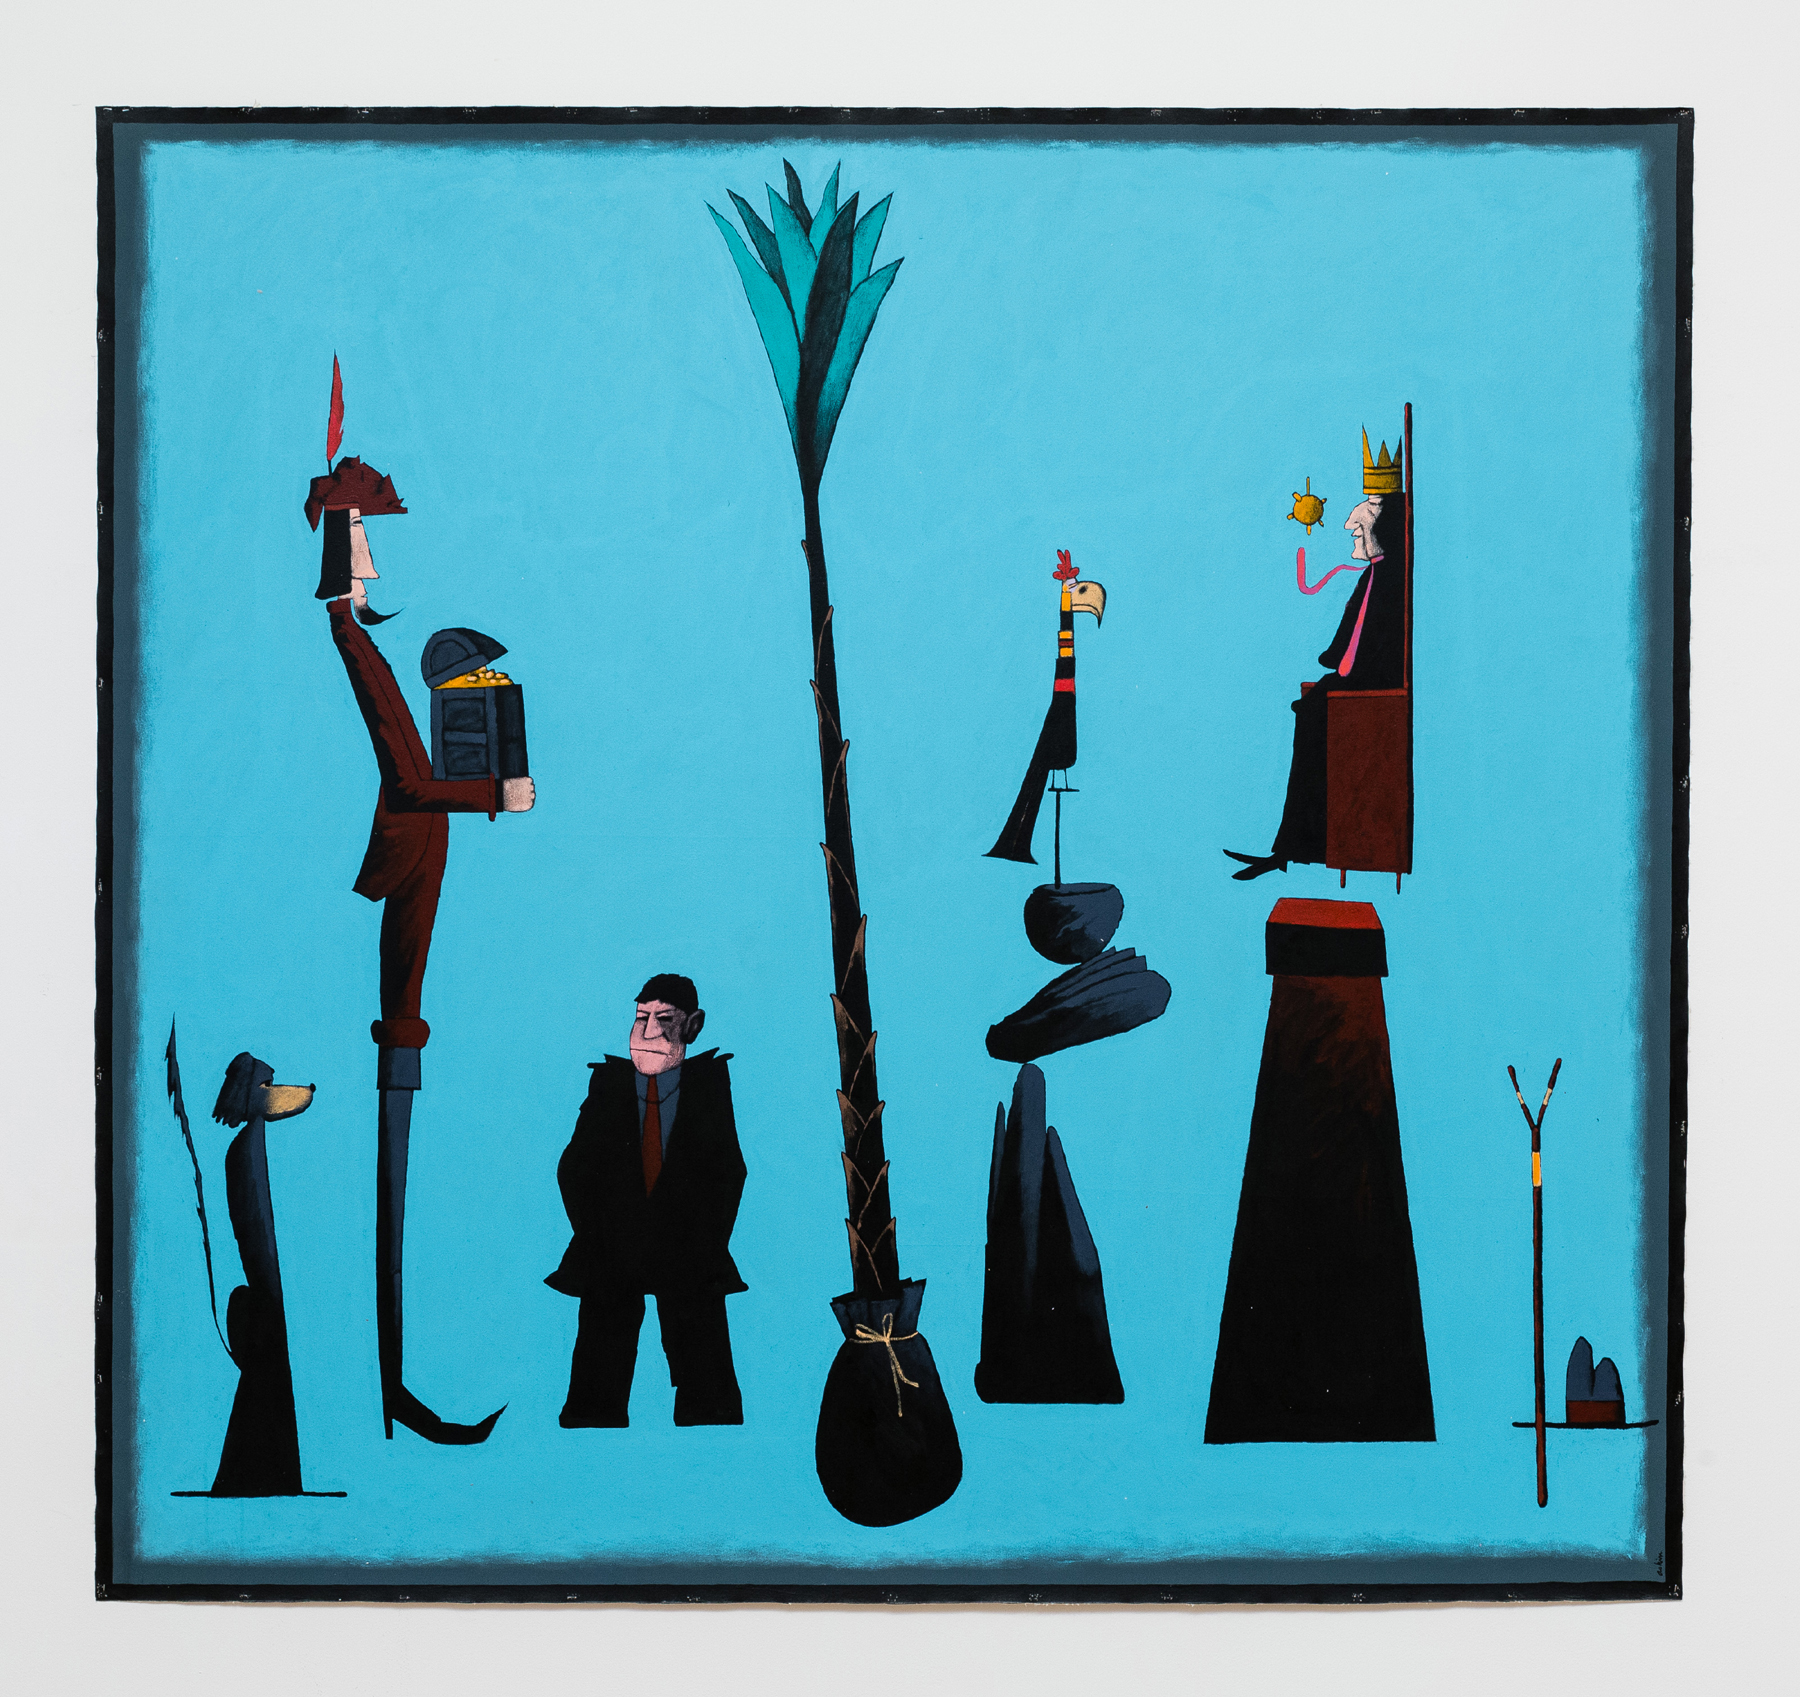 A blue painting with a palm tree, bird, king, and other figures.